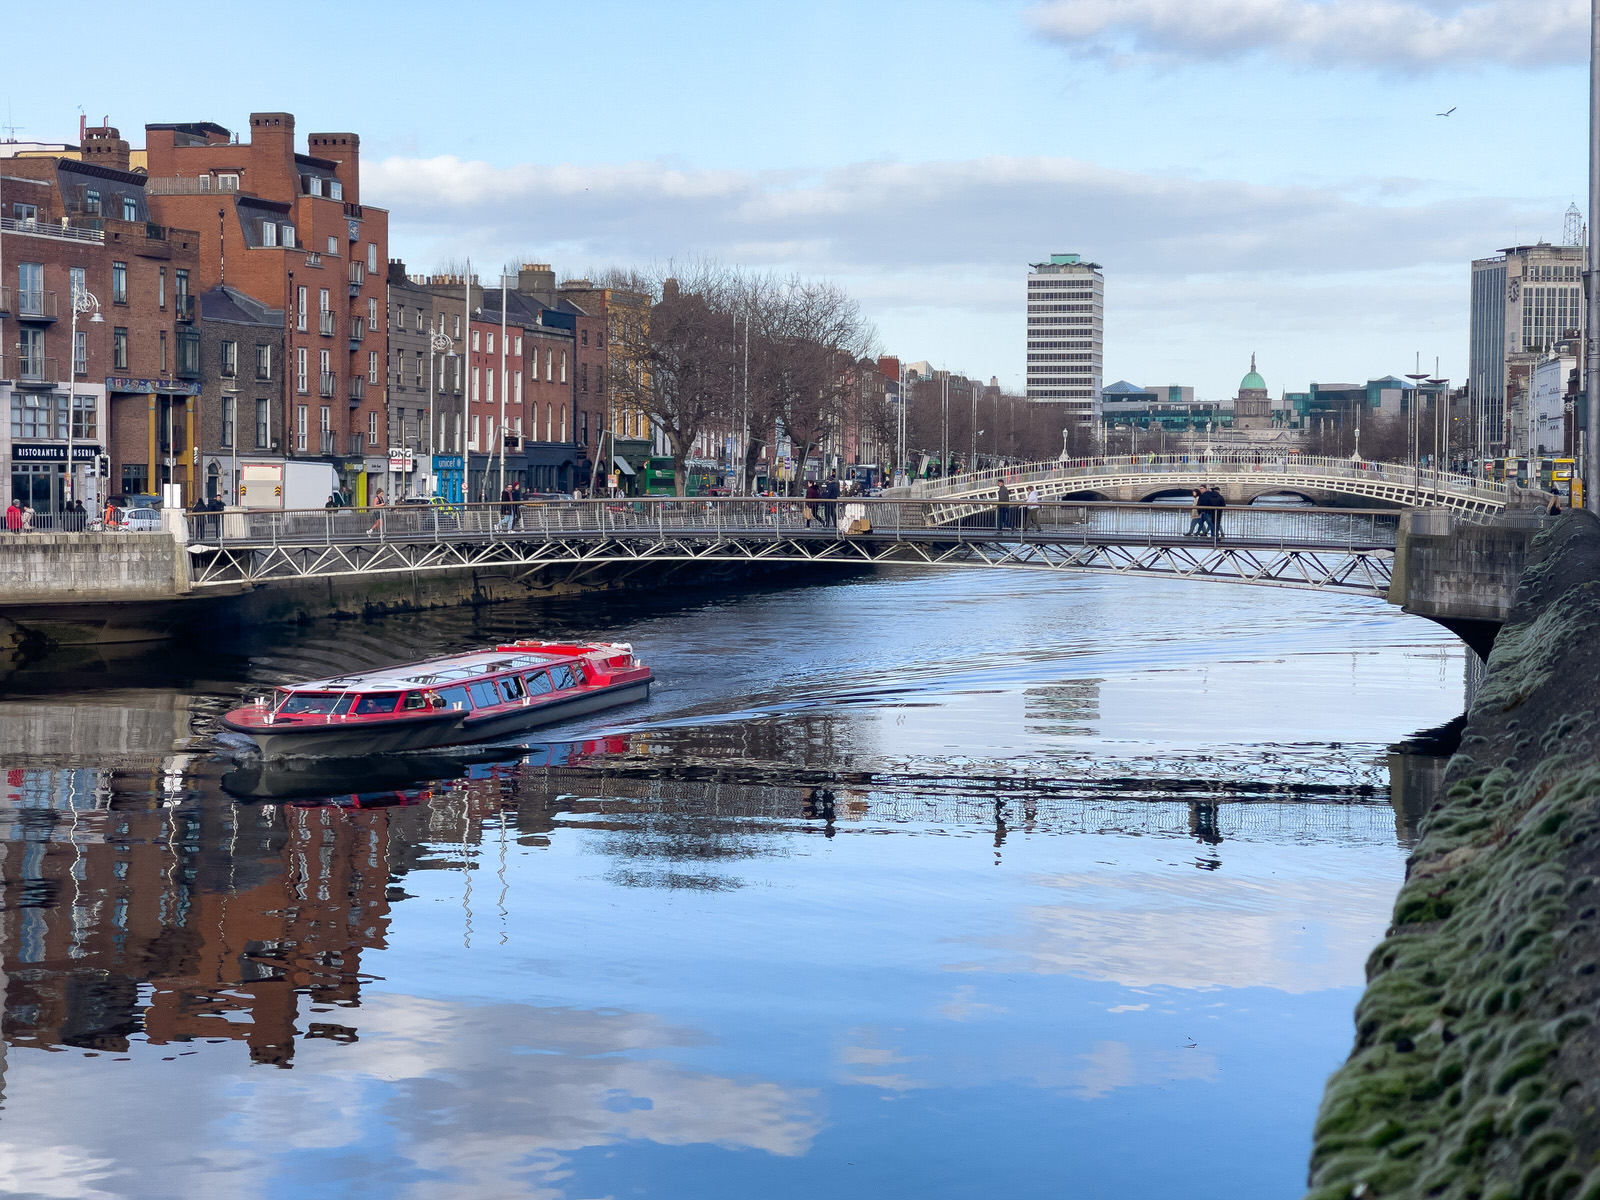 I HAD NOTHING BETTER TO DO [SO I PHOTOGRAPHED THE SPIRIT OF THE DOCKLANDS TURNING ON THE RIVER LIFFEY]-229436-1